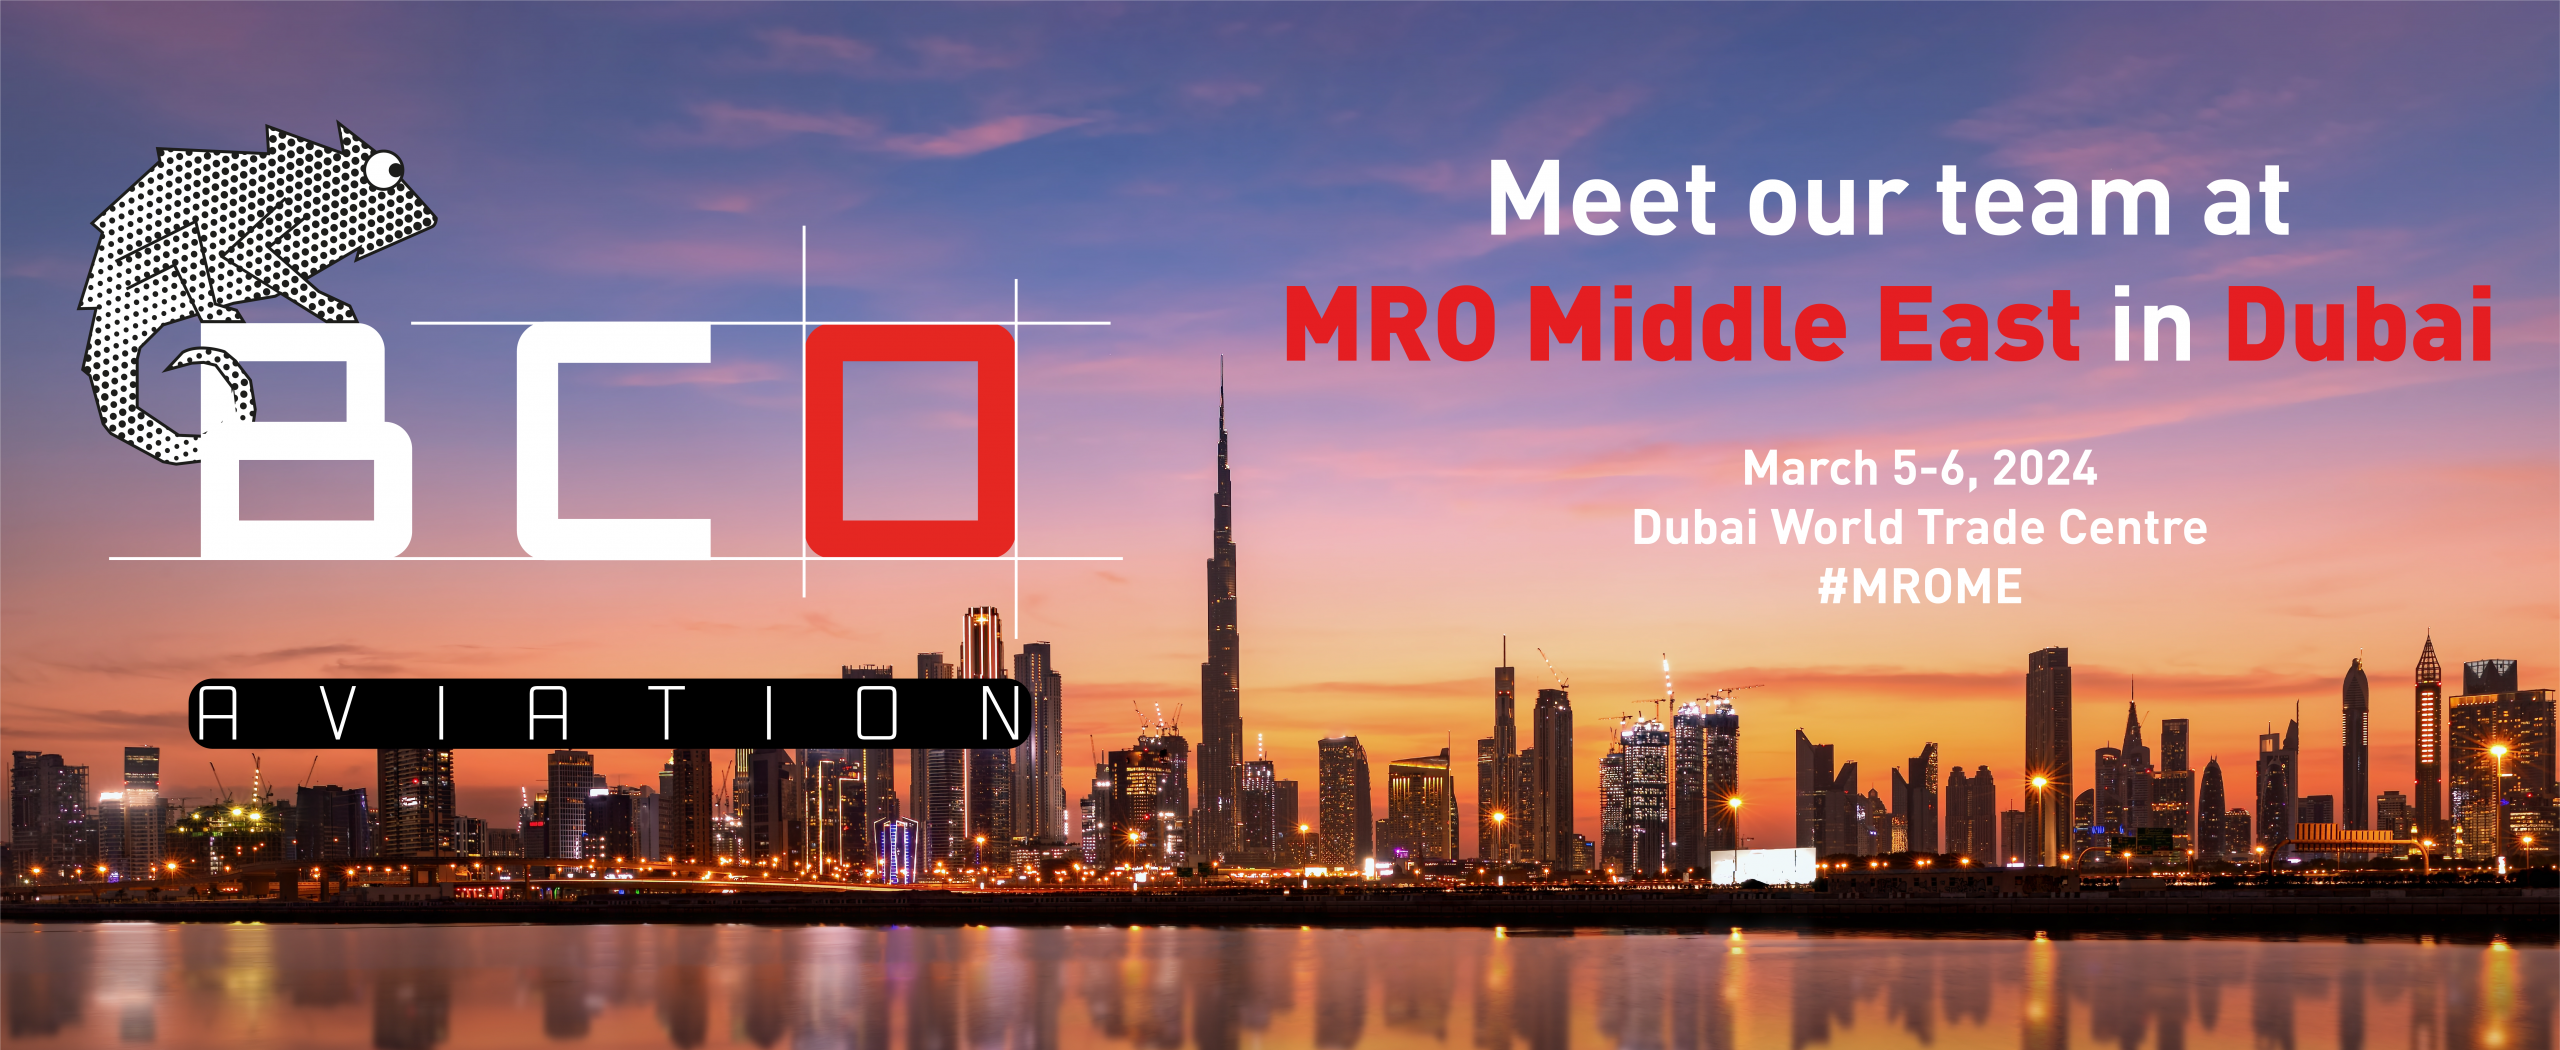 Illustration for: Meet our team at MRO Middle East in Dubai